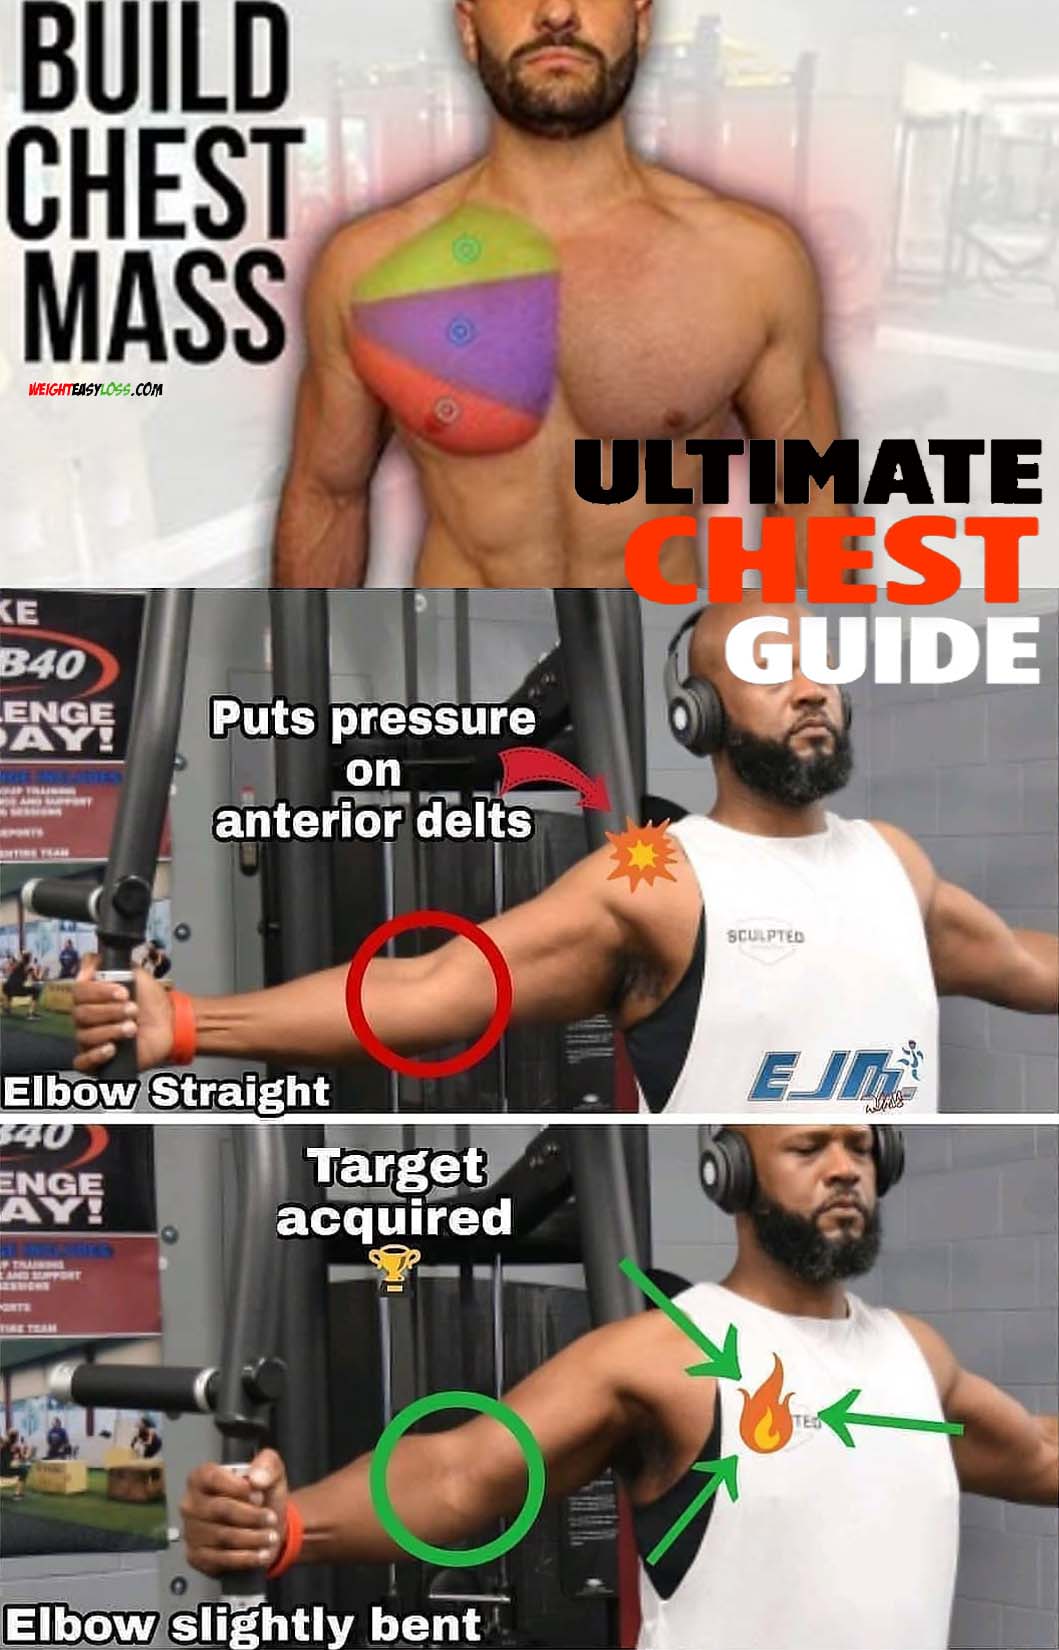 BUILD CHEST MASS GUIDE